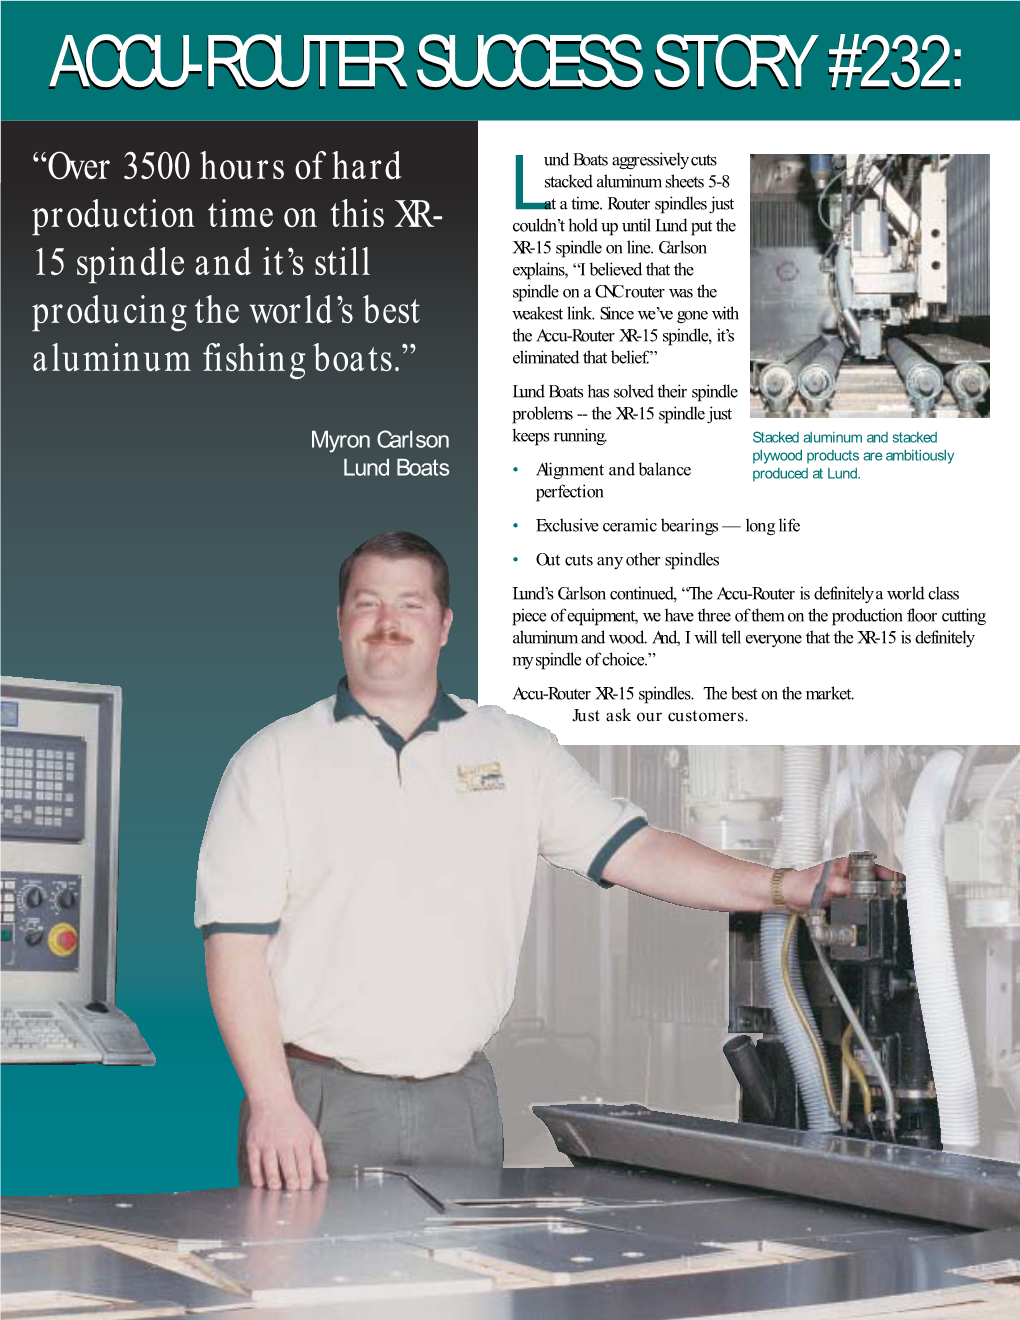 Lund Boats Has Solved Their Spindle Problems -- the XR-15 Spindle Just Myron Carlson Keeps Running